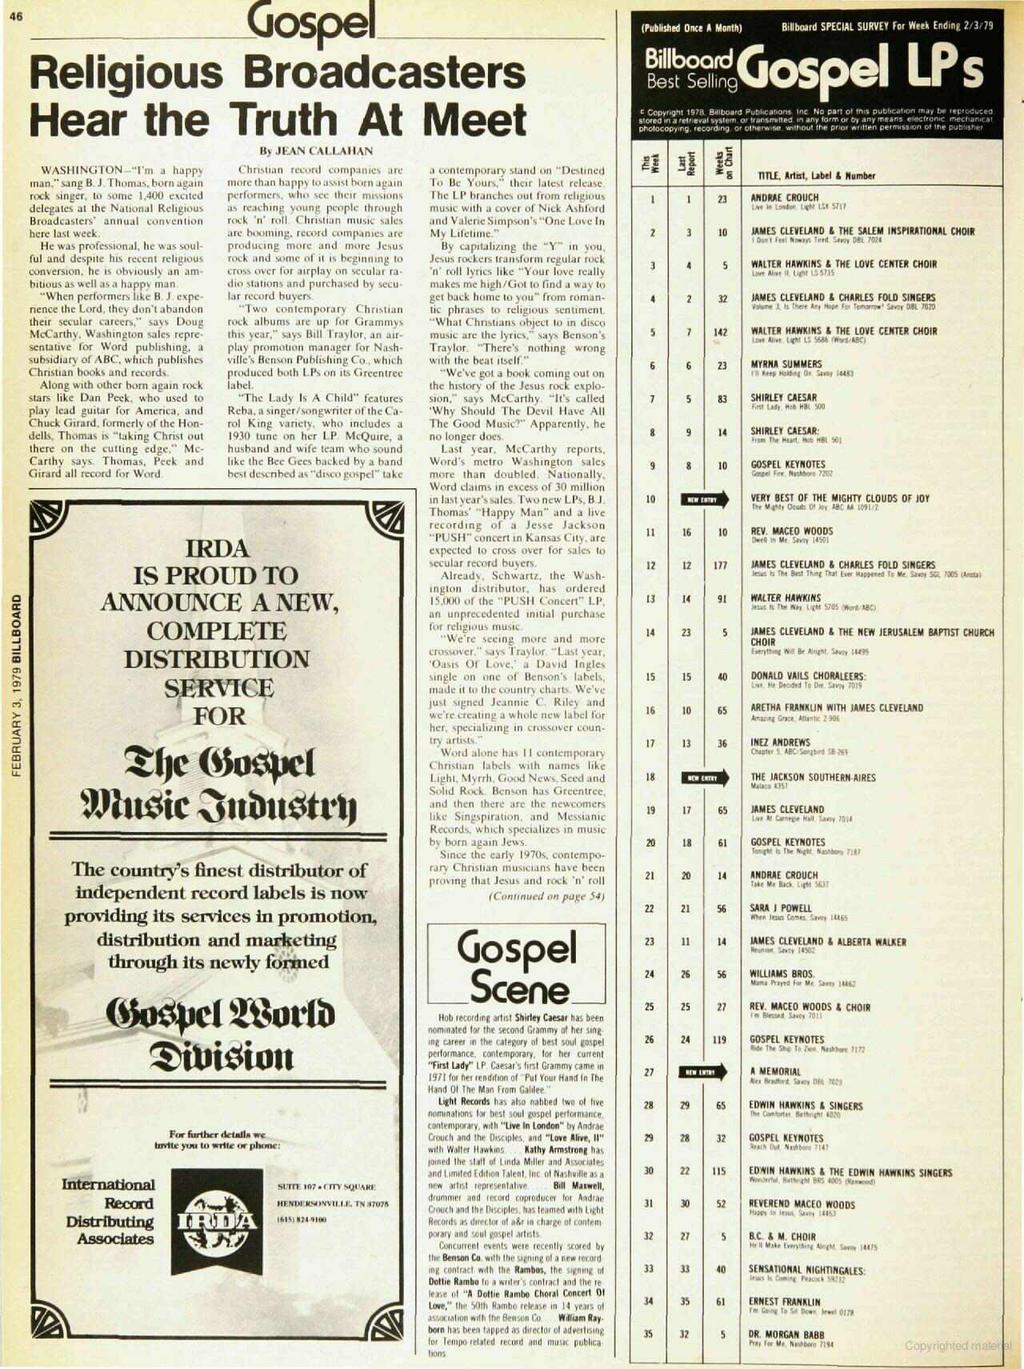 46 Gospel Religious Broadcasters Hear the Truth At Meet (Published Once A Month) Billboard SPECAL SURVEY For Week Ending 2.379 8illbocard Best Sellen 9 c 19 28 87117oa,d puebca6ons nc No parl ol tn.